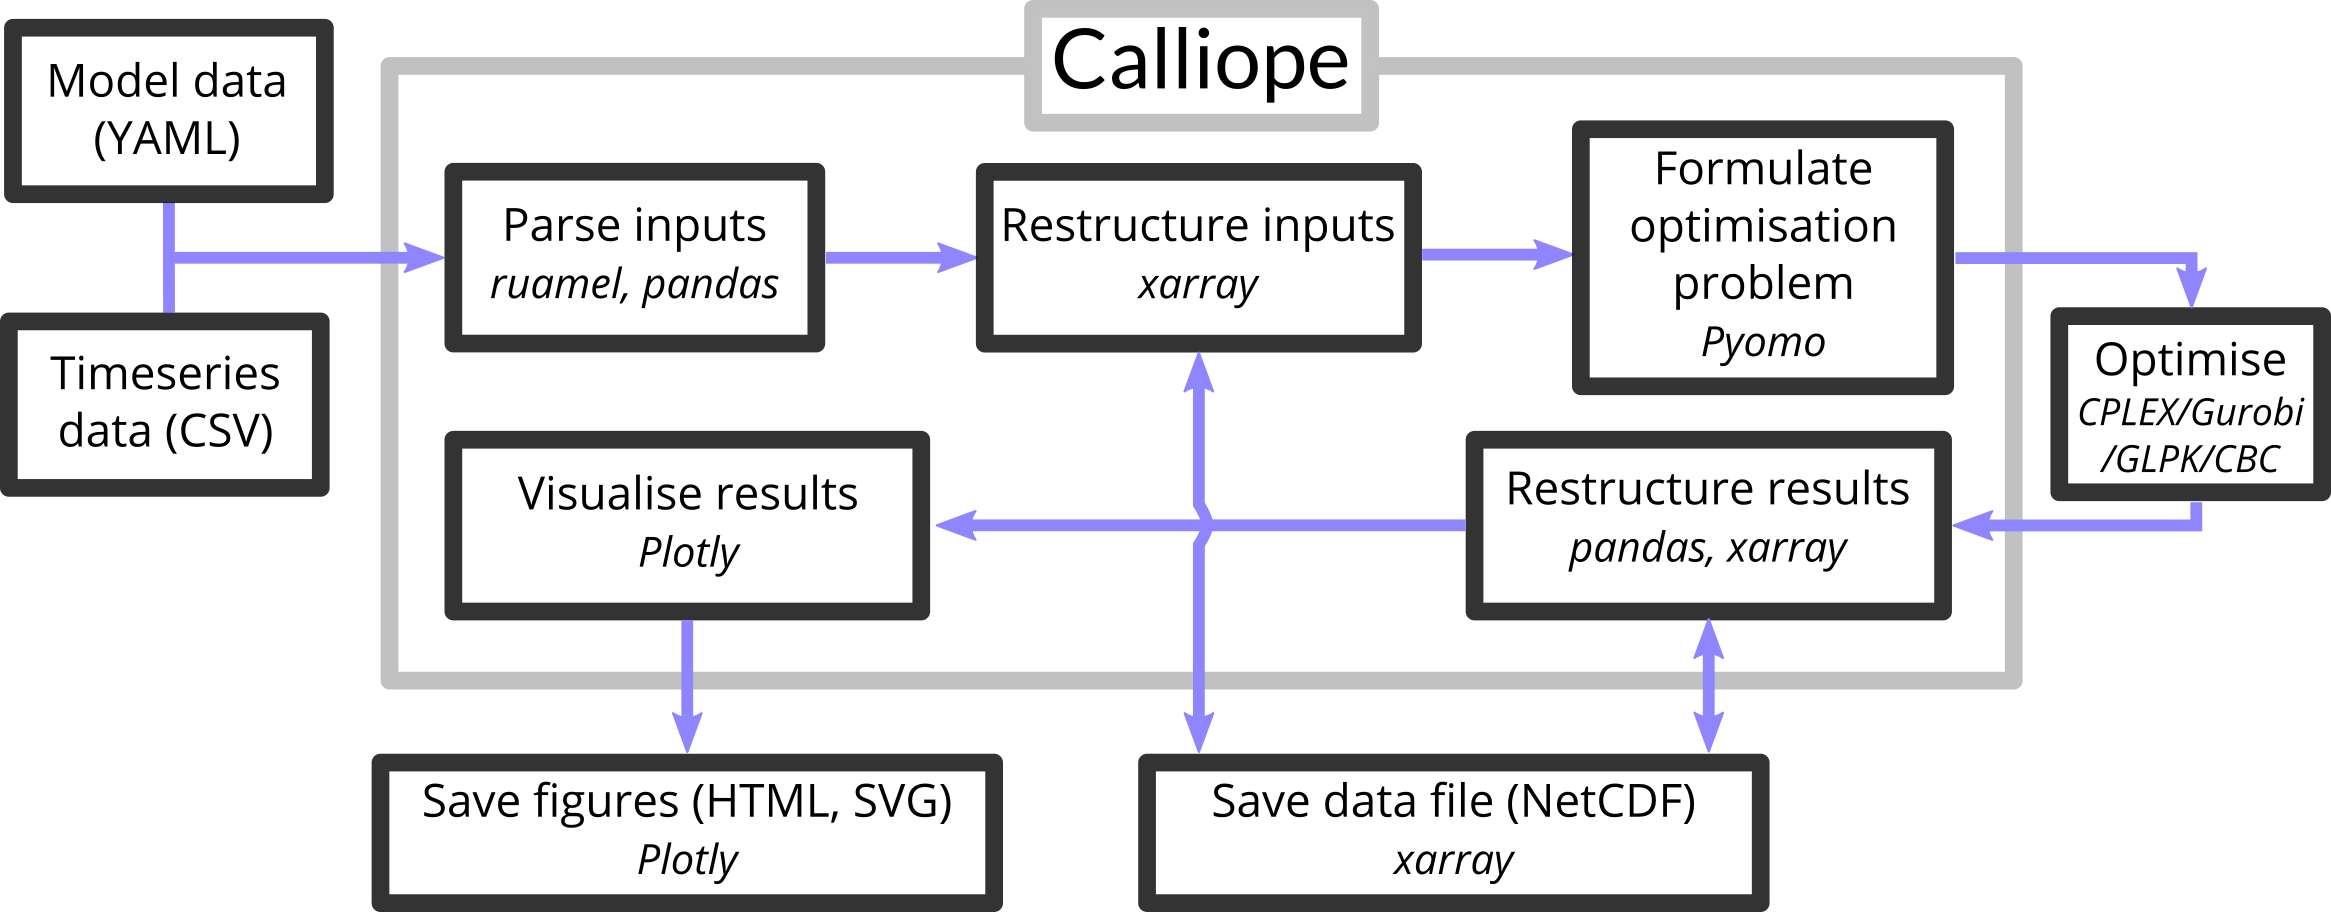 calliope_workflow_overview